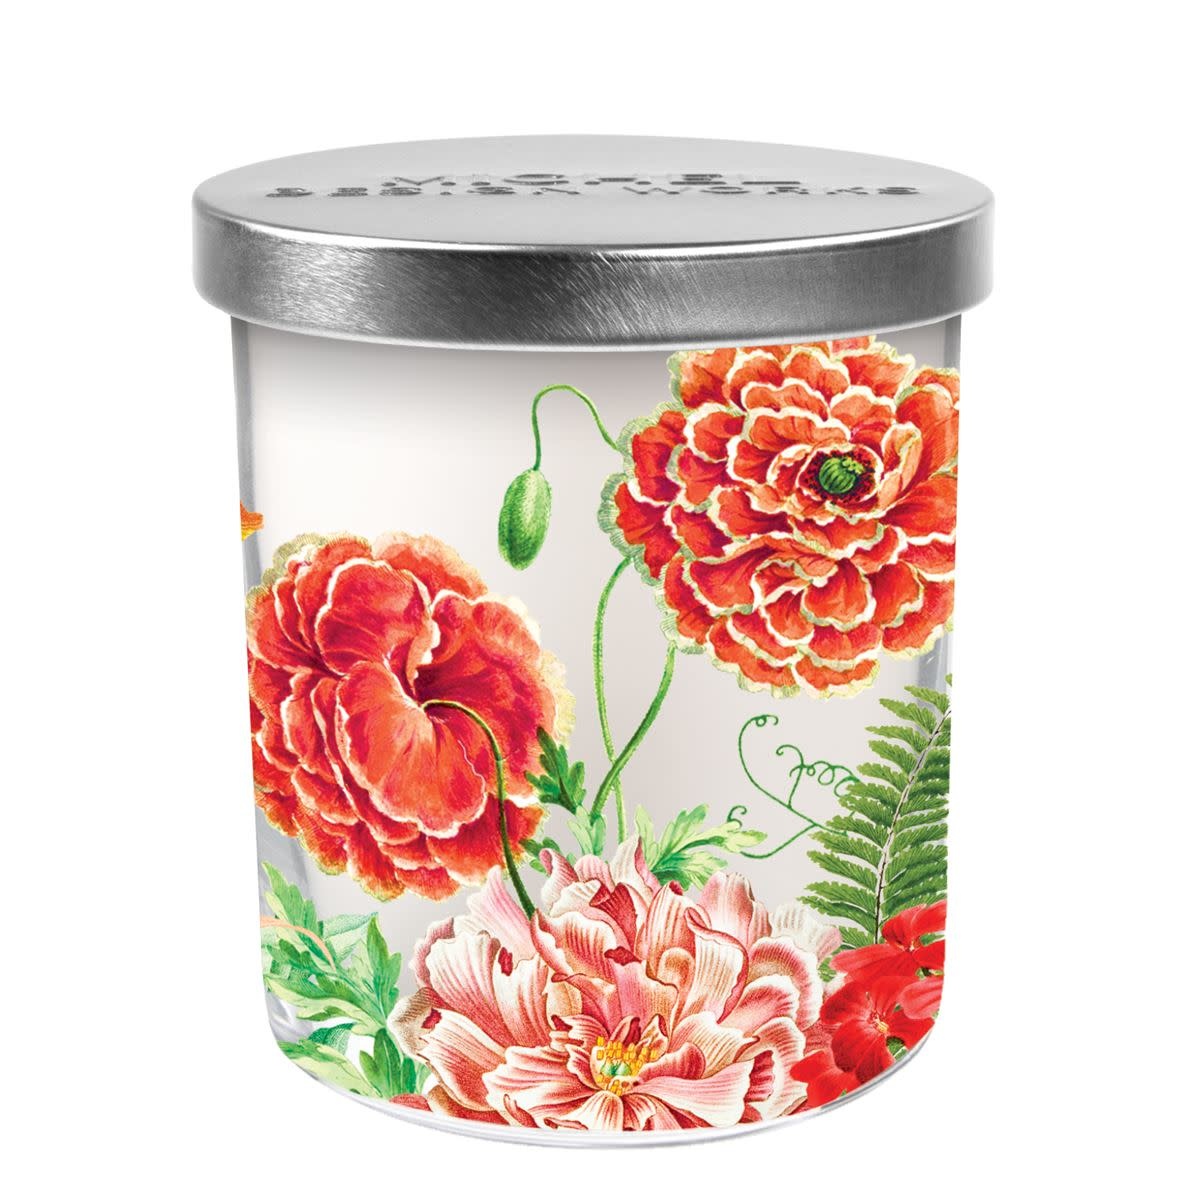 Michel Design Works Poppies and Posies Candle Jar with Lid